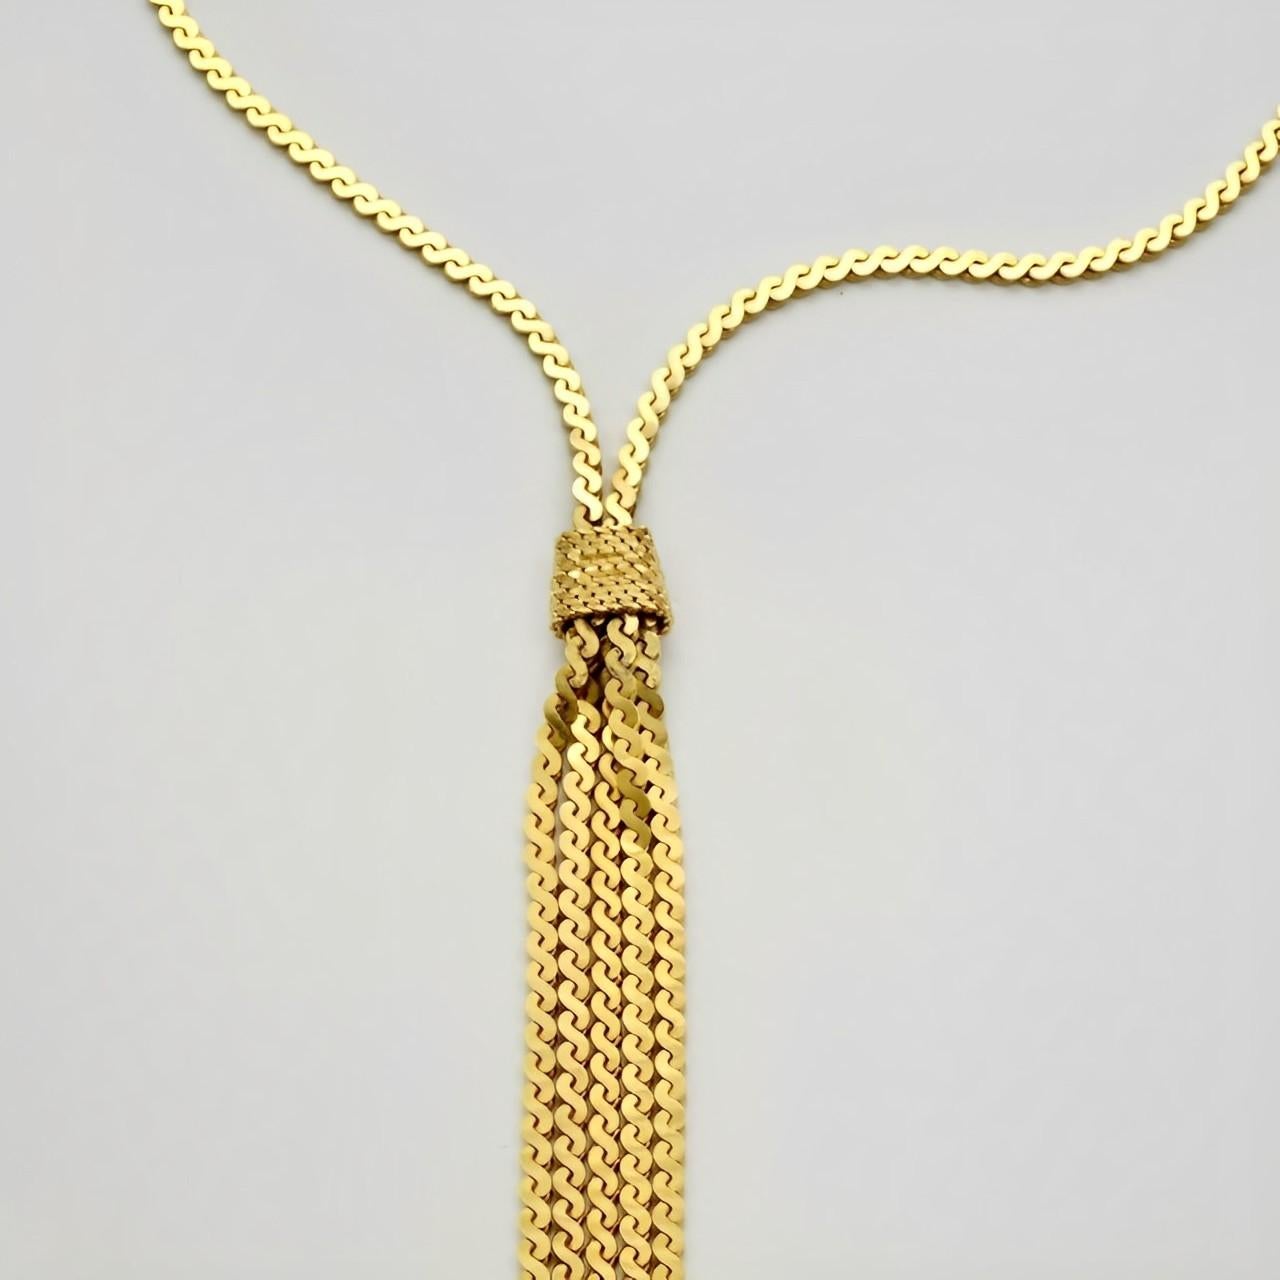 Gold plated serpentine chain necklace, featuring a lovely five strand tassel. Measuring length 47.8 cm / 18.8 inches. The tassel is length 11.4 cm / 4.48 inches. The necklace is in very good condition.

This beautiful vintage necklace is circa 1980s.